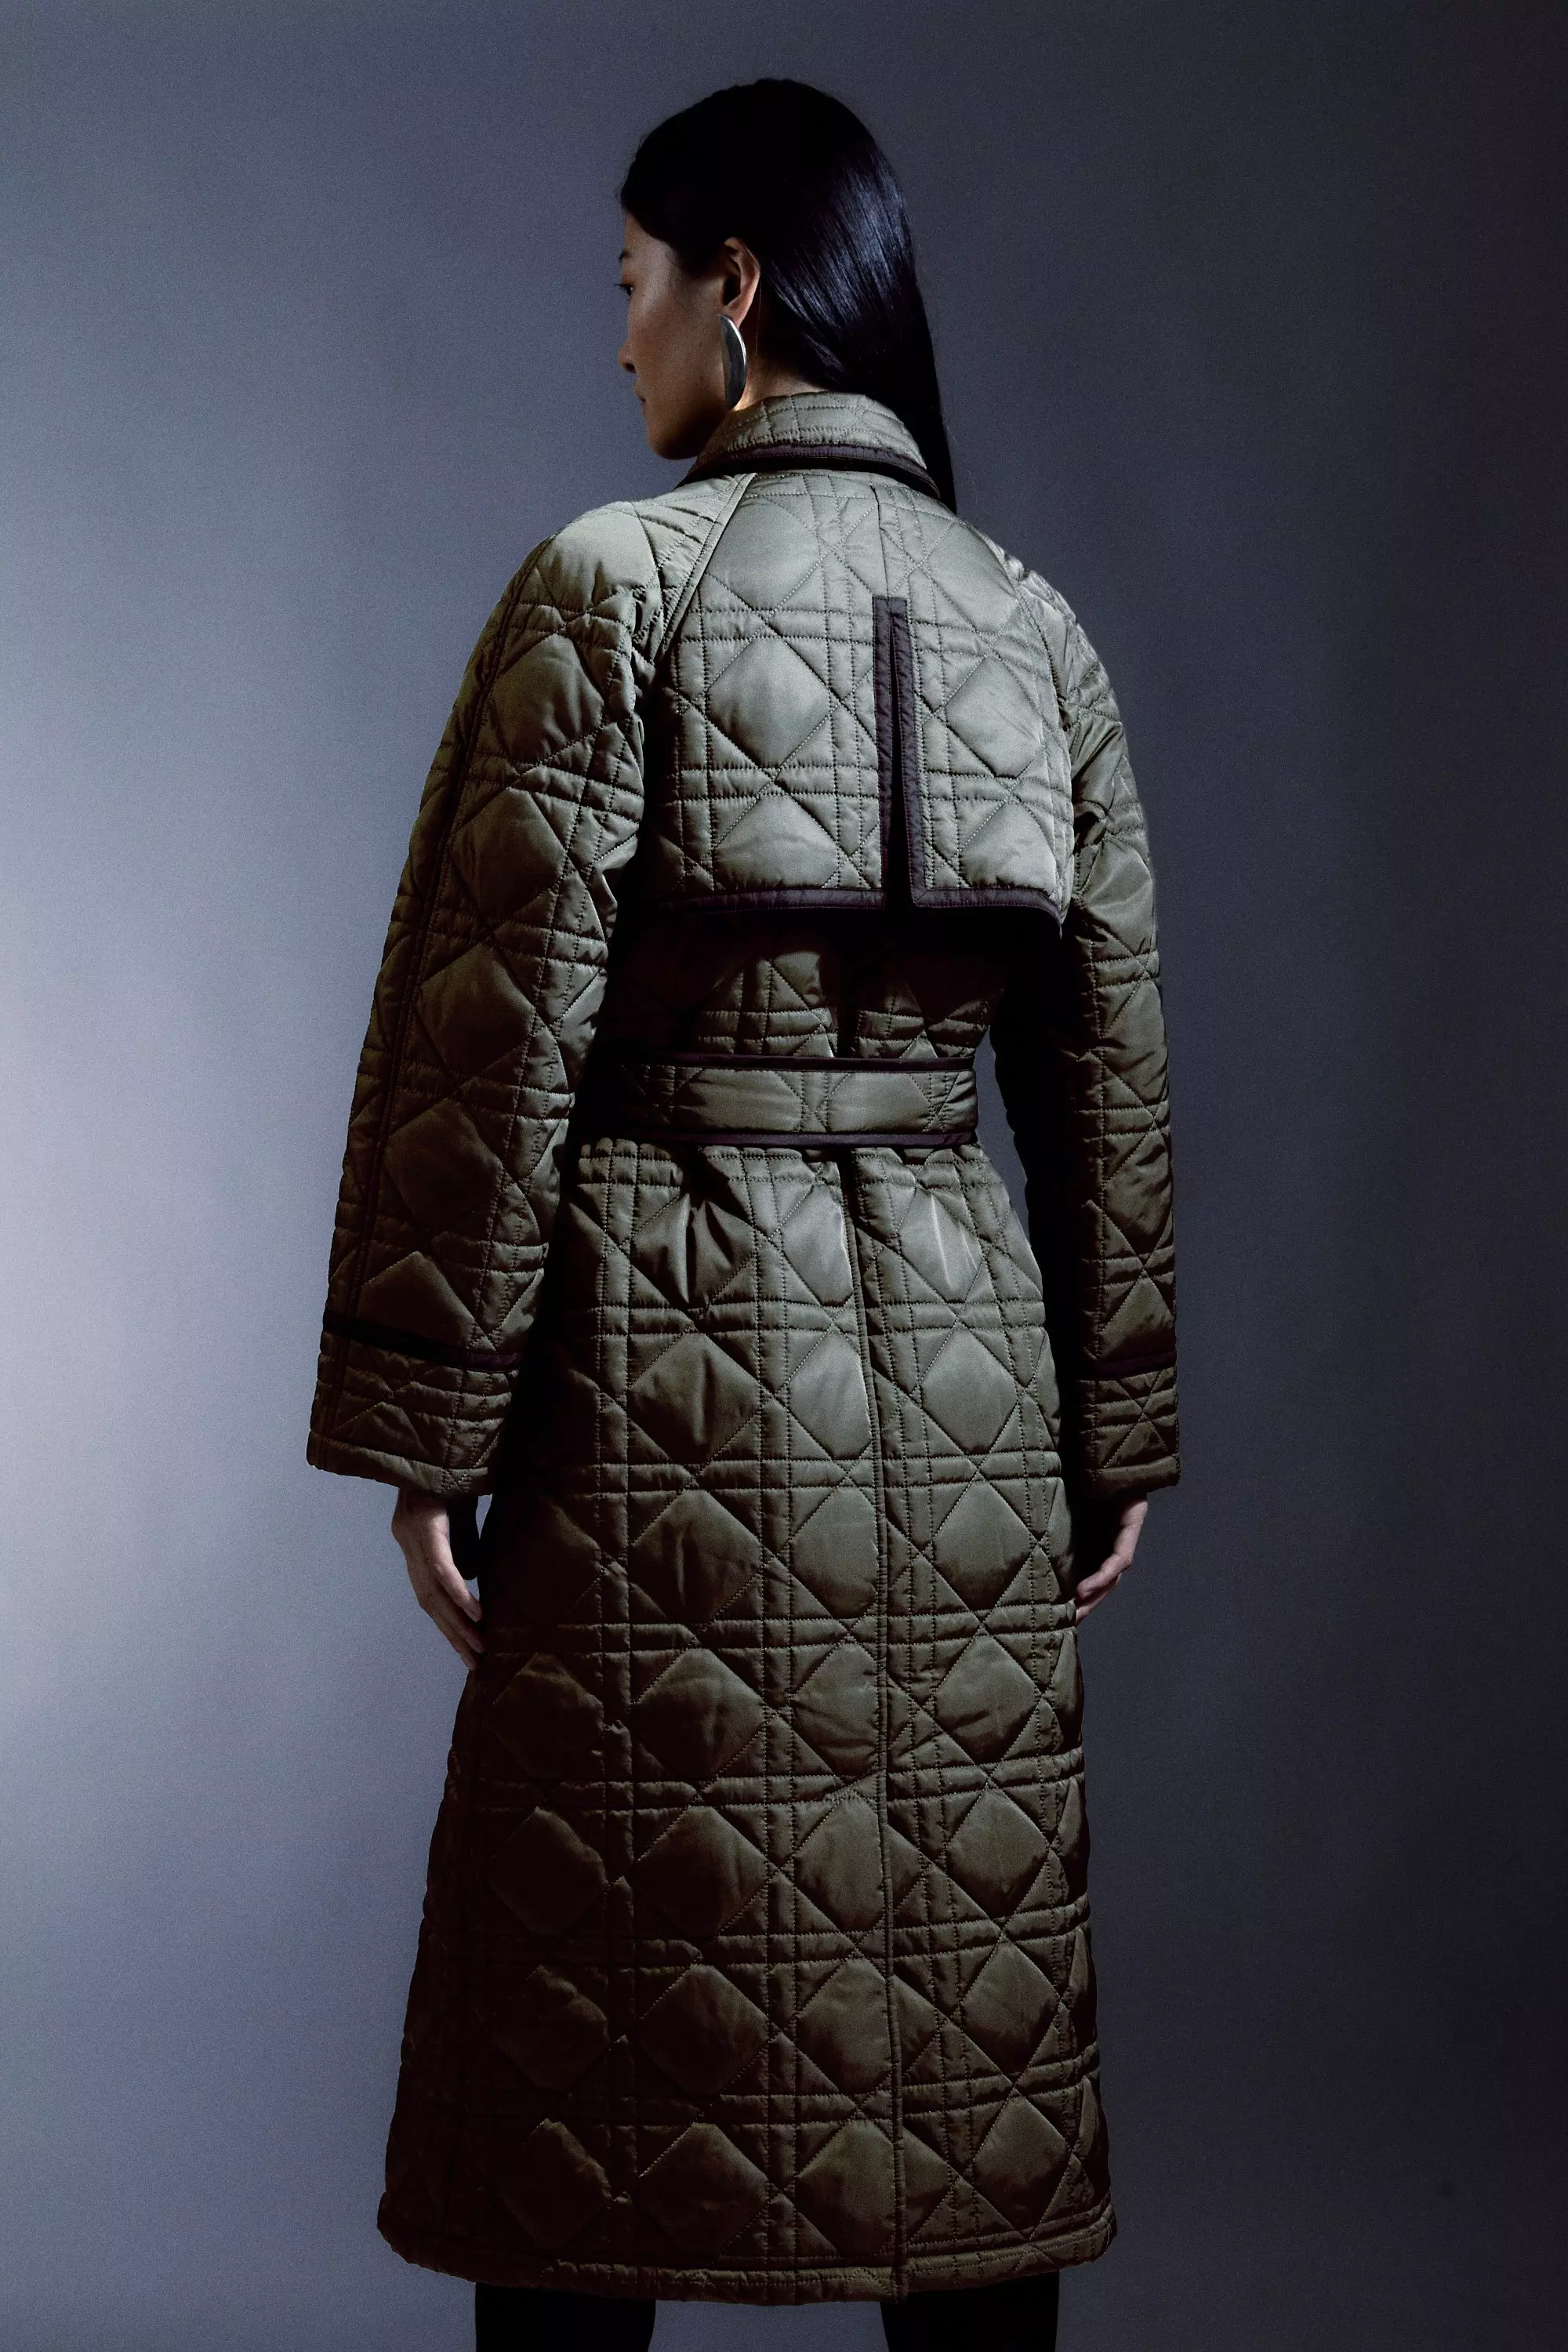 Dazzling Diamond-Quilted Coat by Studio EY